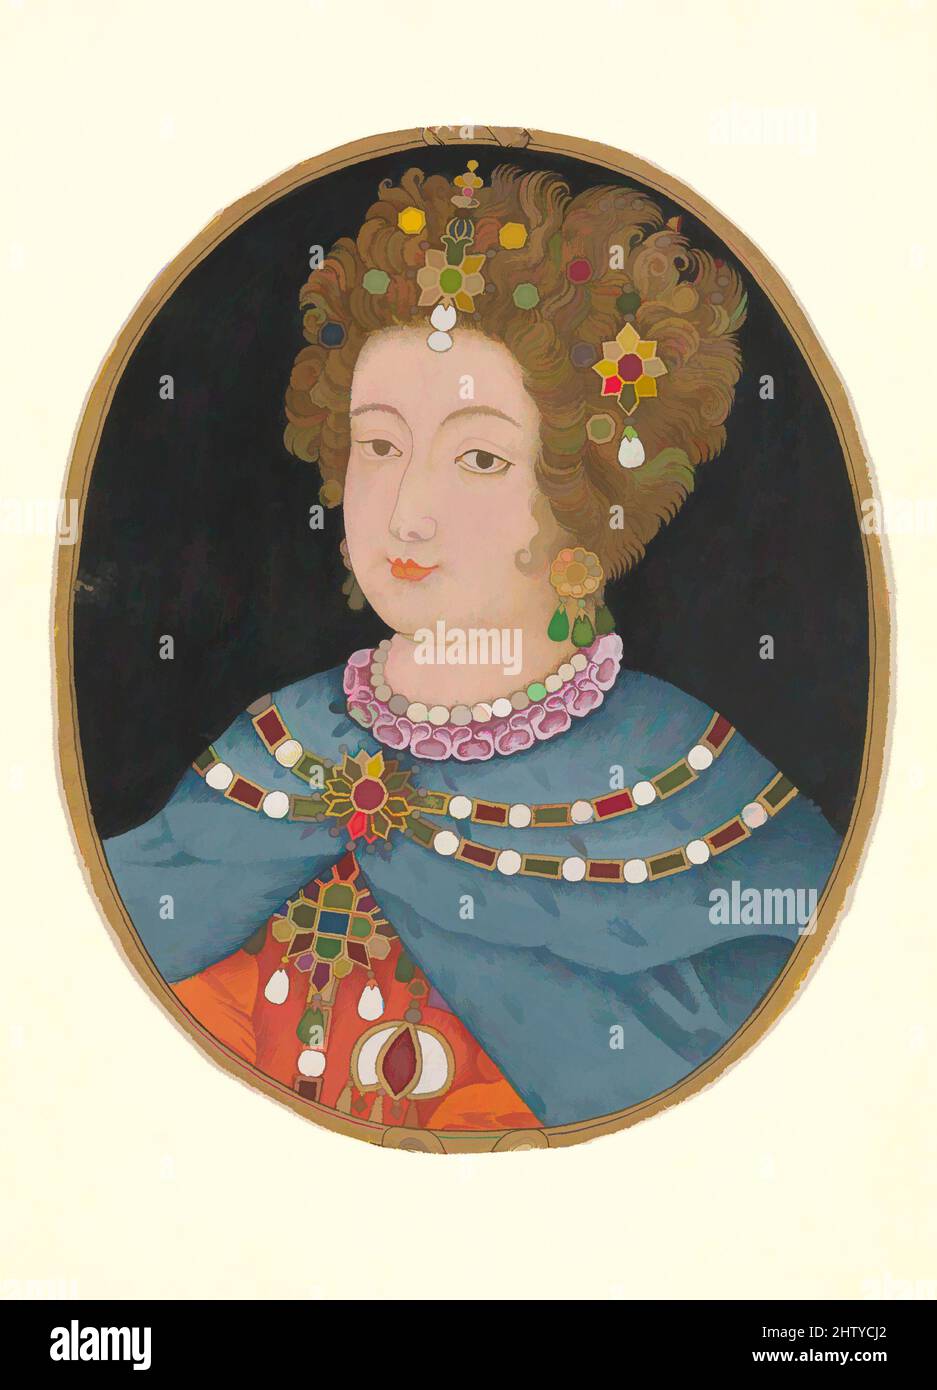 Art inspired by Lady in Elizabethan Costume, late 17th century, Country of Origin India, probably Lucknow, Opaque watercolor, gold, and silver on paper, H. 7 in. (17.8 cm), Codices, This image is probably based on a European engraving following a popular oval format. While the lady, Classic works modernized by Artotop with a splash of modernity. Shapes, color and value, eye-catching visual impact on art. Emotions through freedom of artworks in a contemporary way. A timeless message pursuing a wildly creative new direction. Artists turning to the digital medium and creating the Artotop NFT Stock Photo